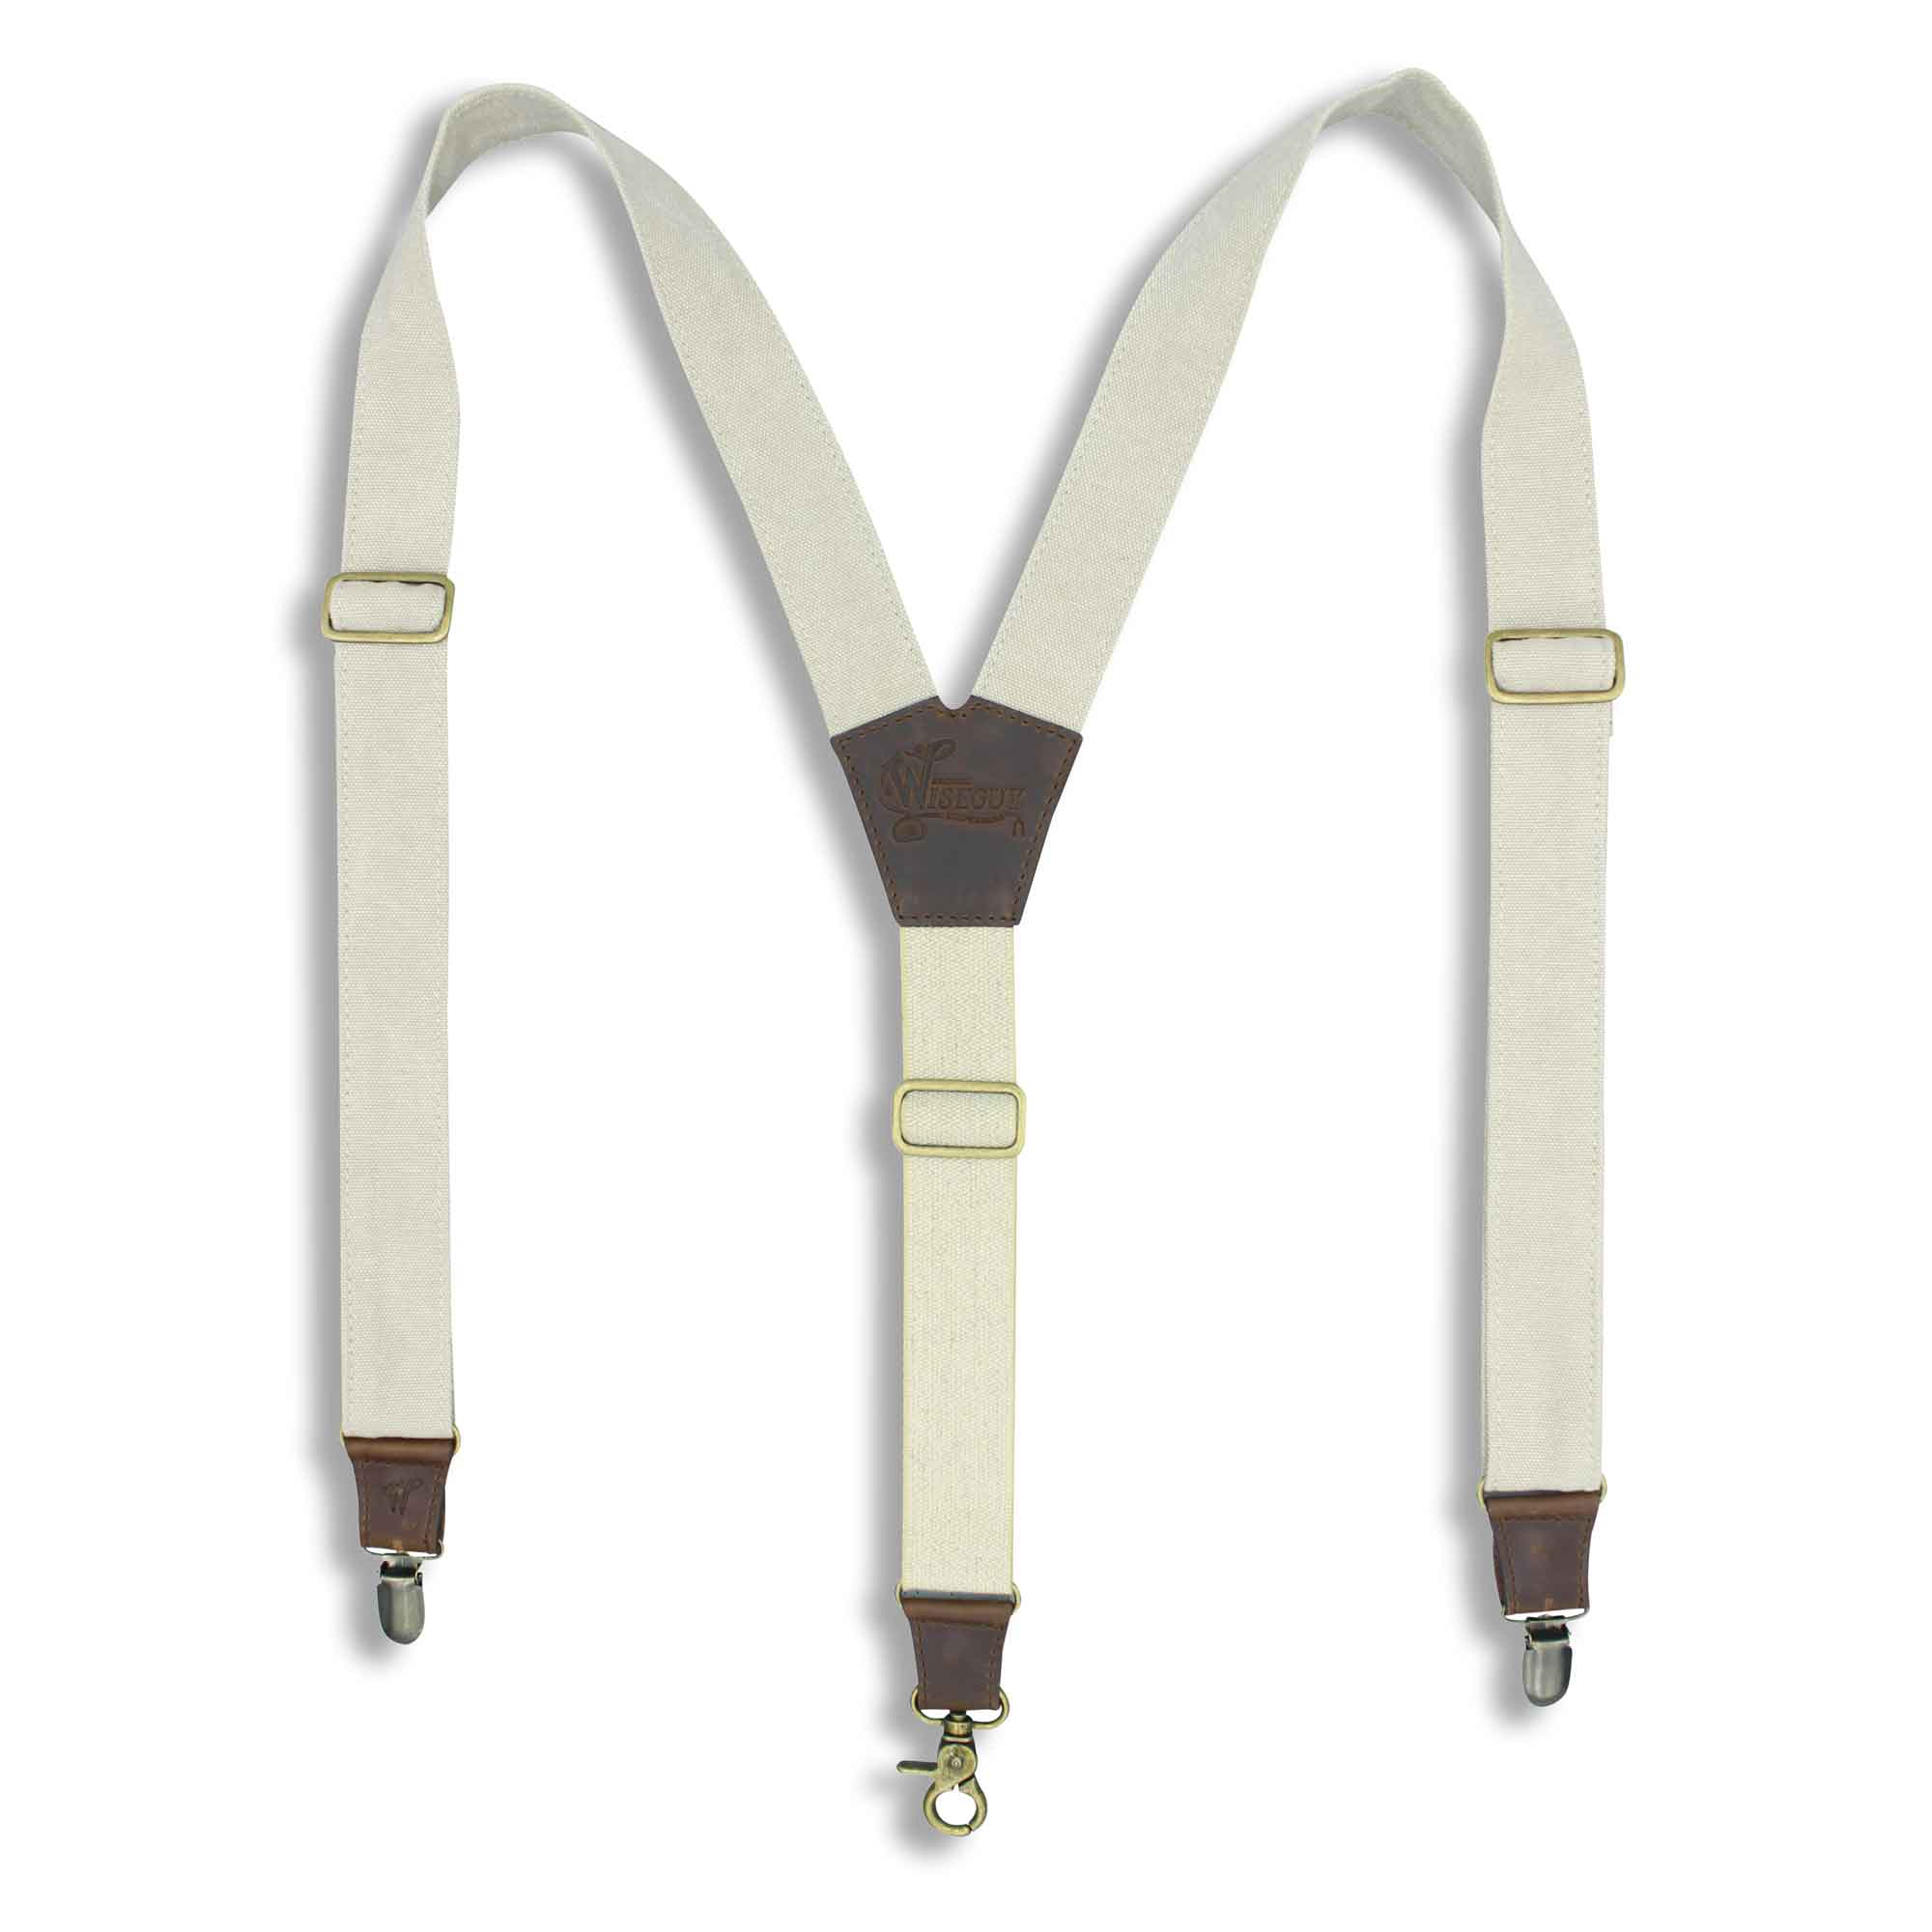 The Duck Canvas Vintage white Suspenders with white Elastic back strap - Wiseguy Suspenders